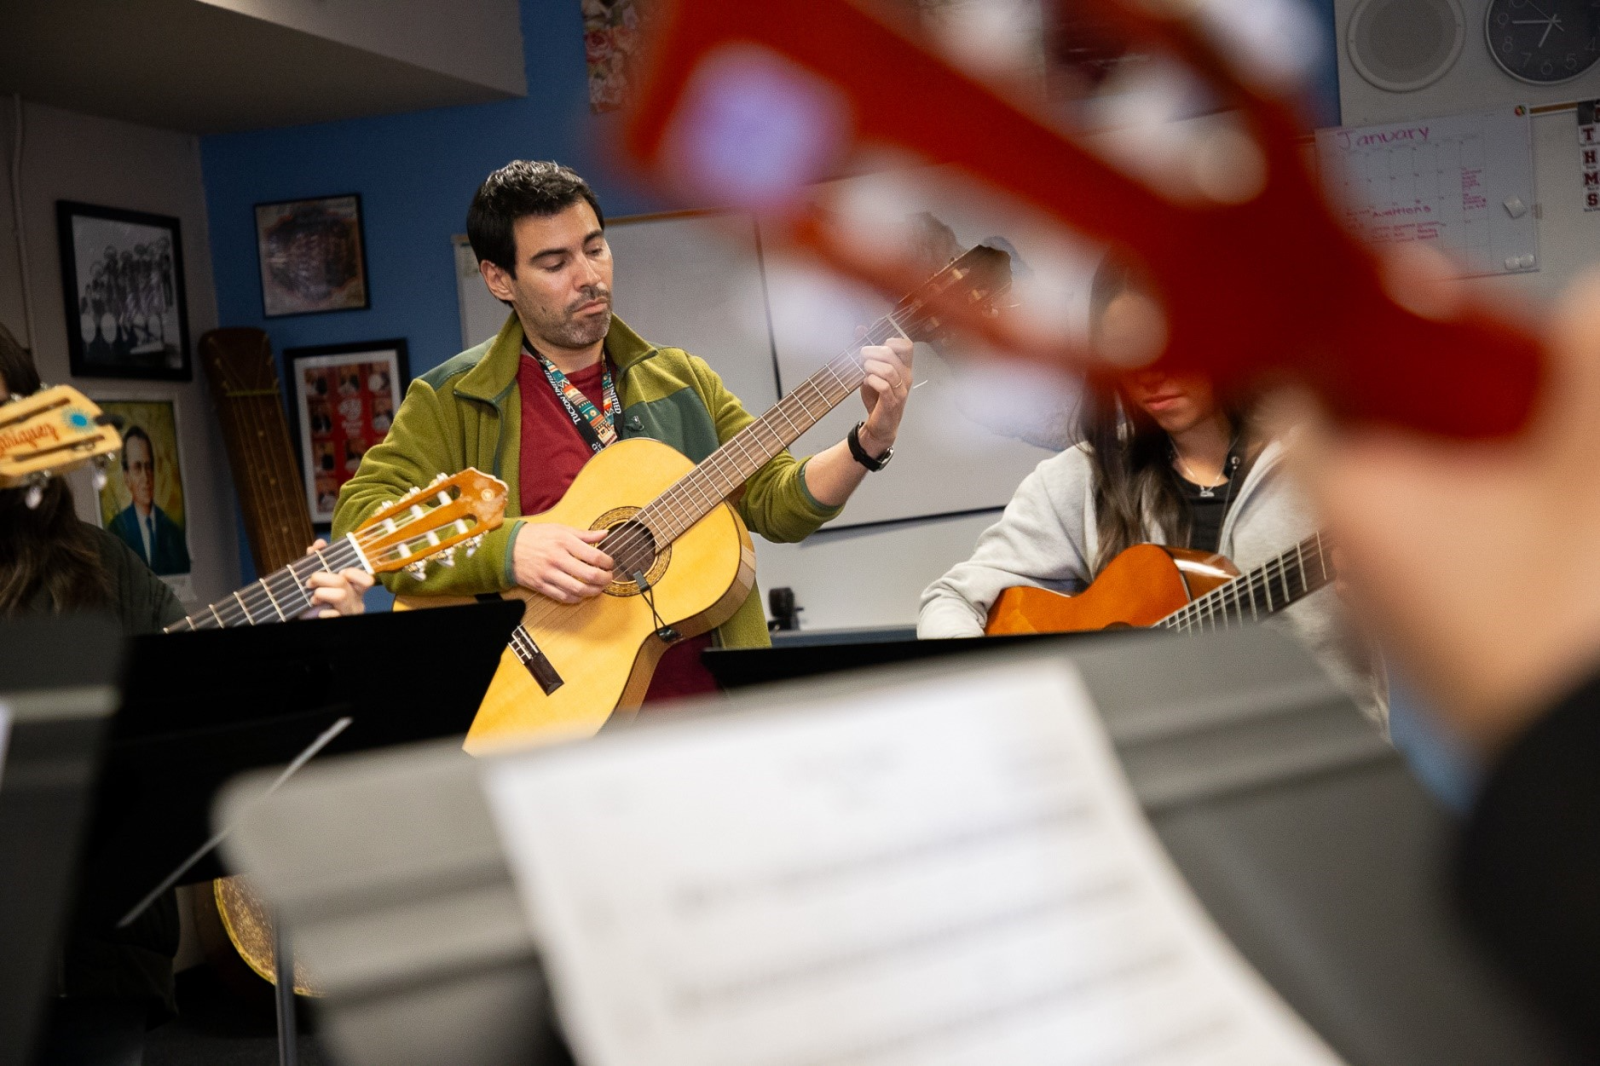 A mariachi teacher leads students on the guitar